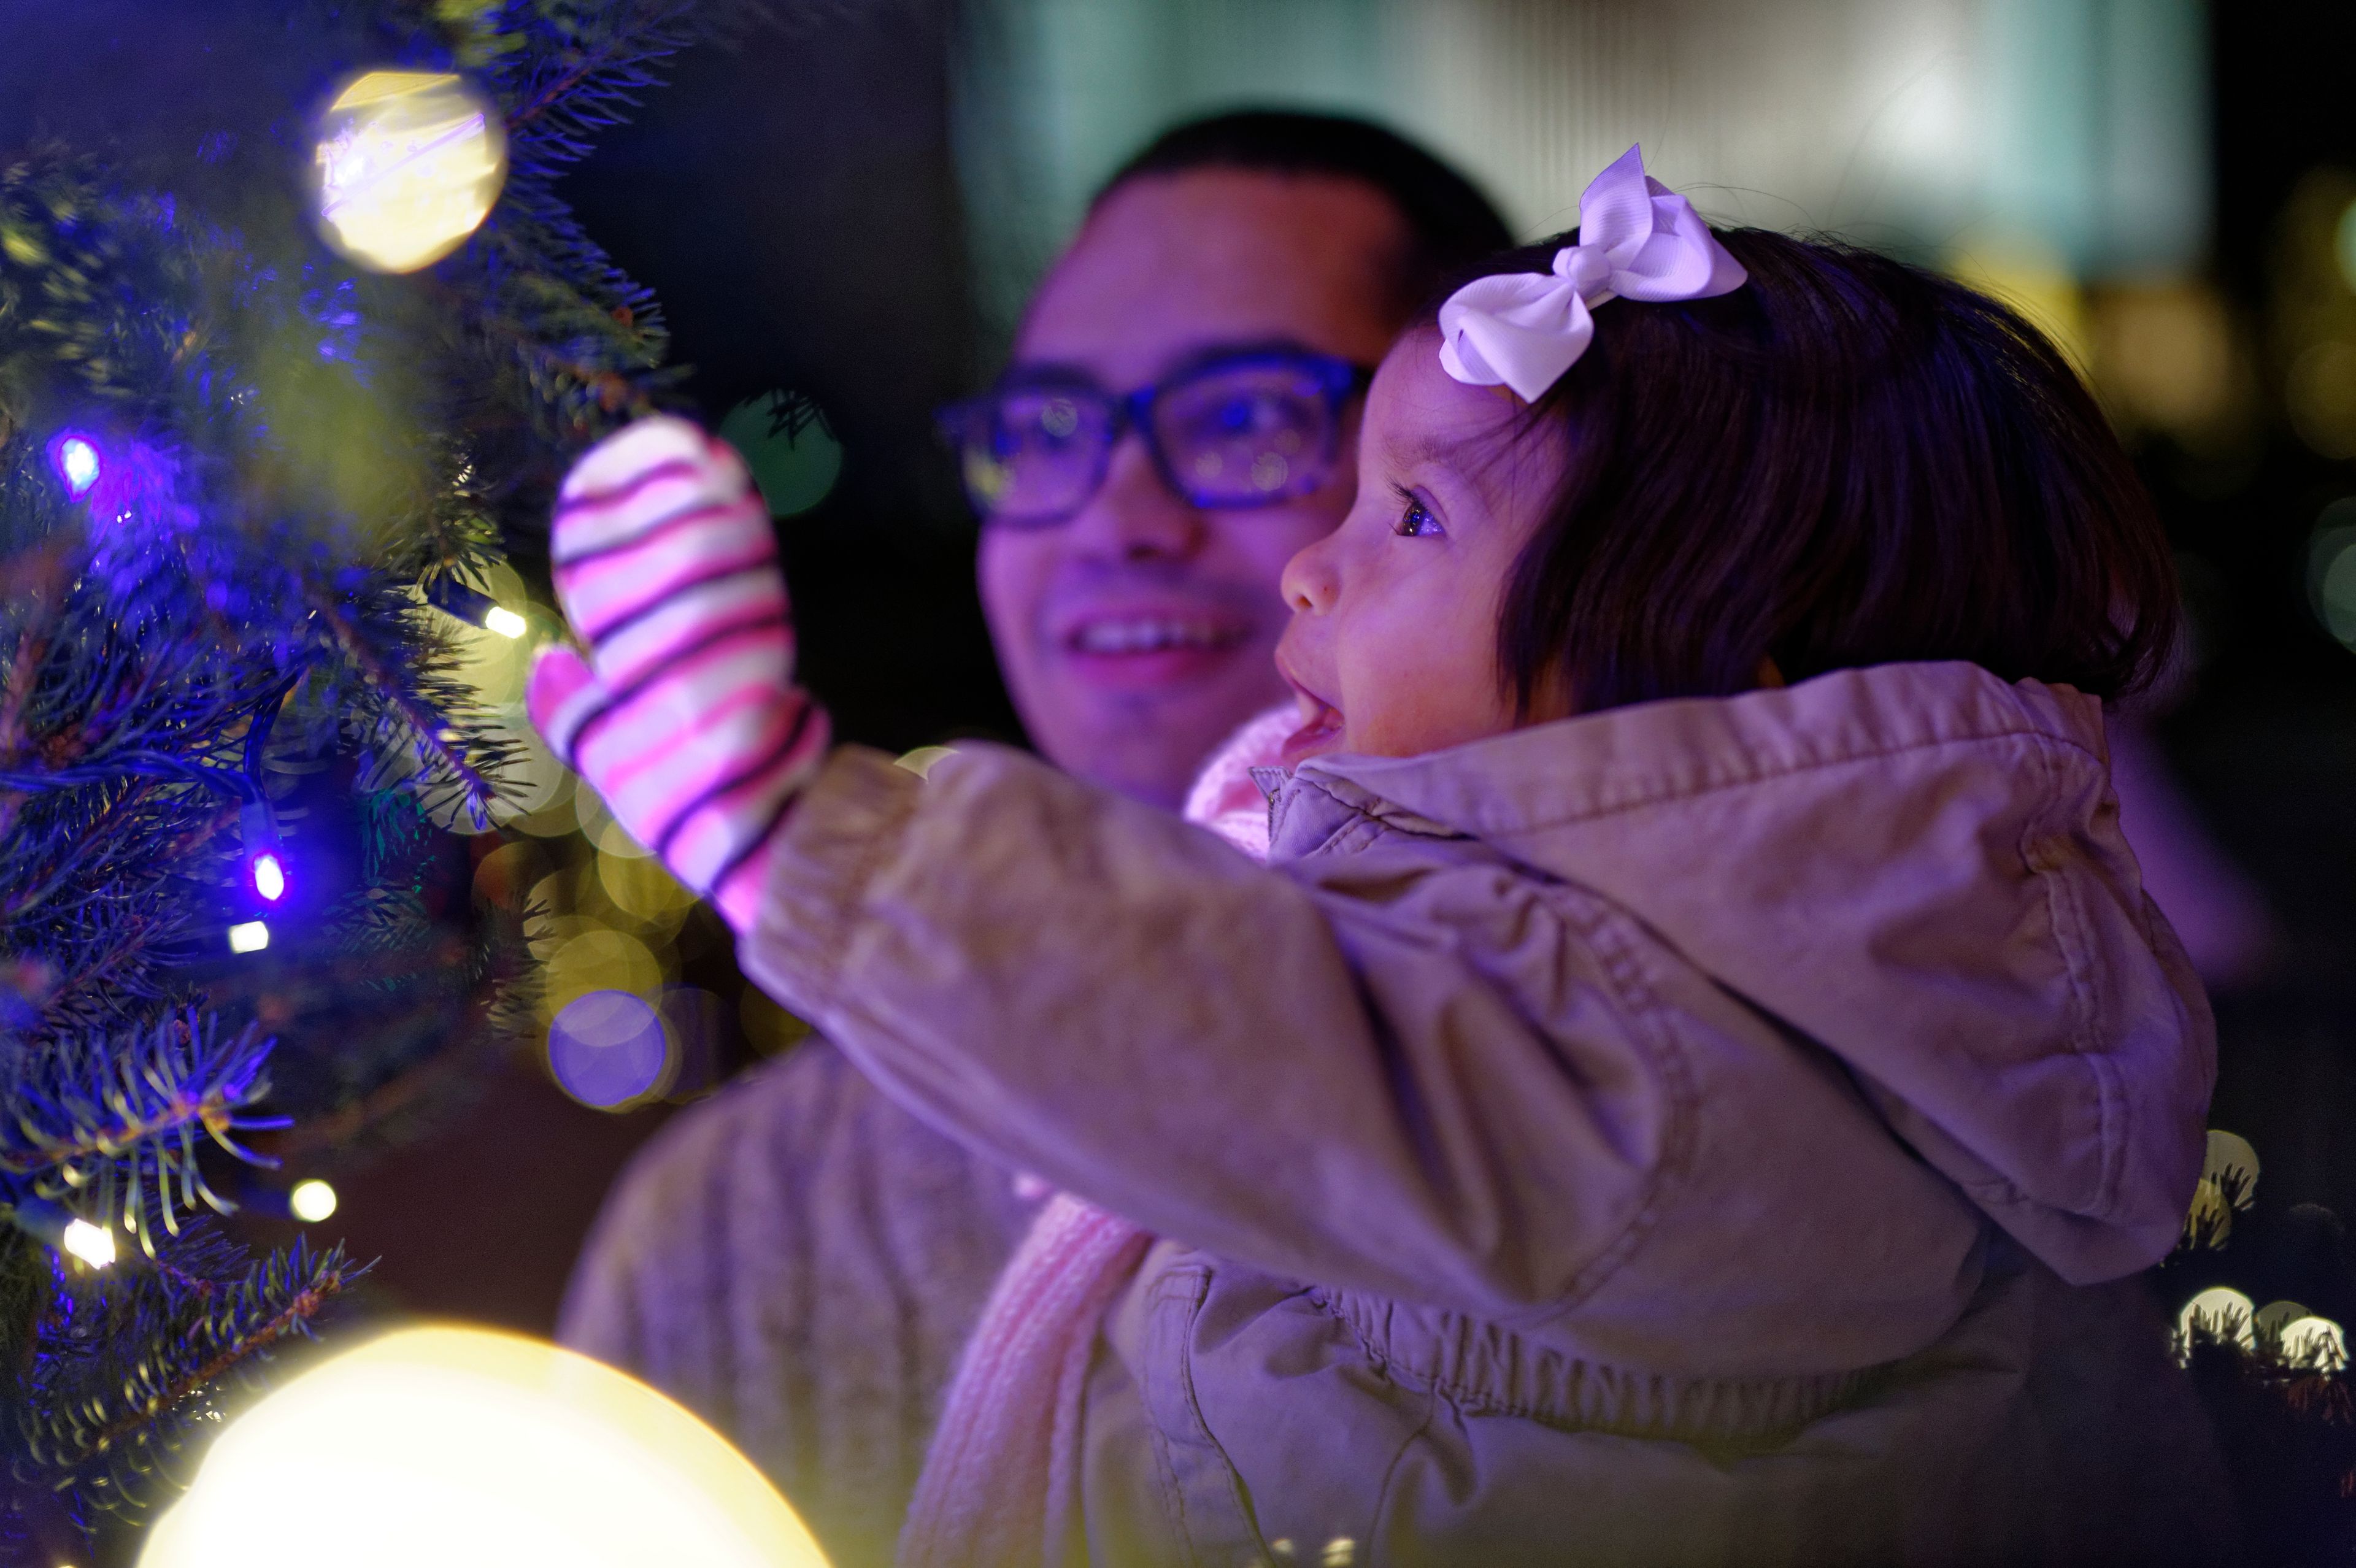 A father holding his young daughter while looking at the Christmas tree.